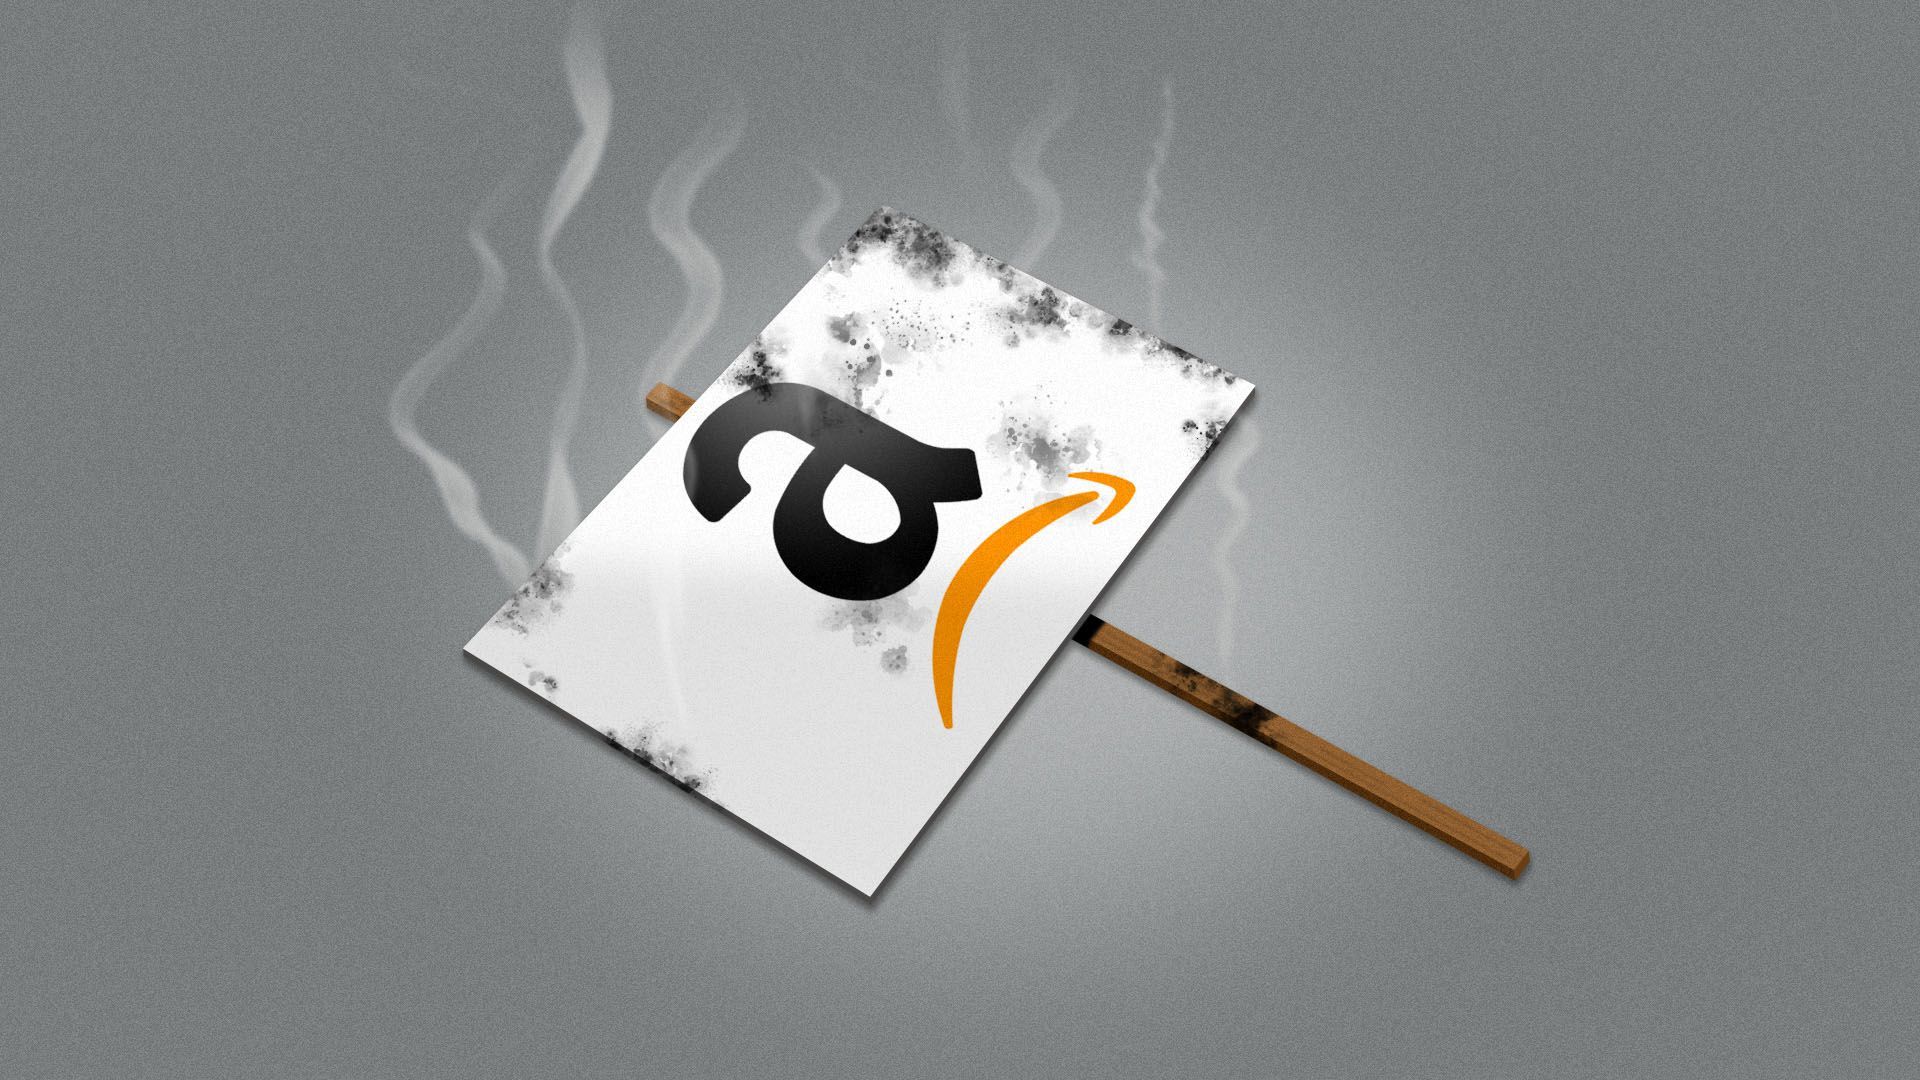 Illustration of a damaged picket sign with a modified Amazon logo on it with smoke coming off